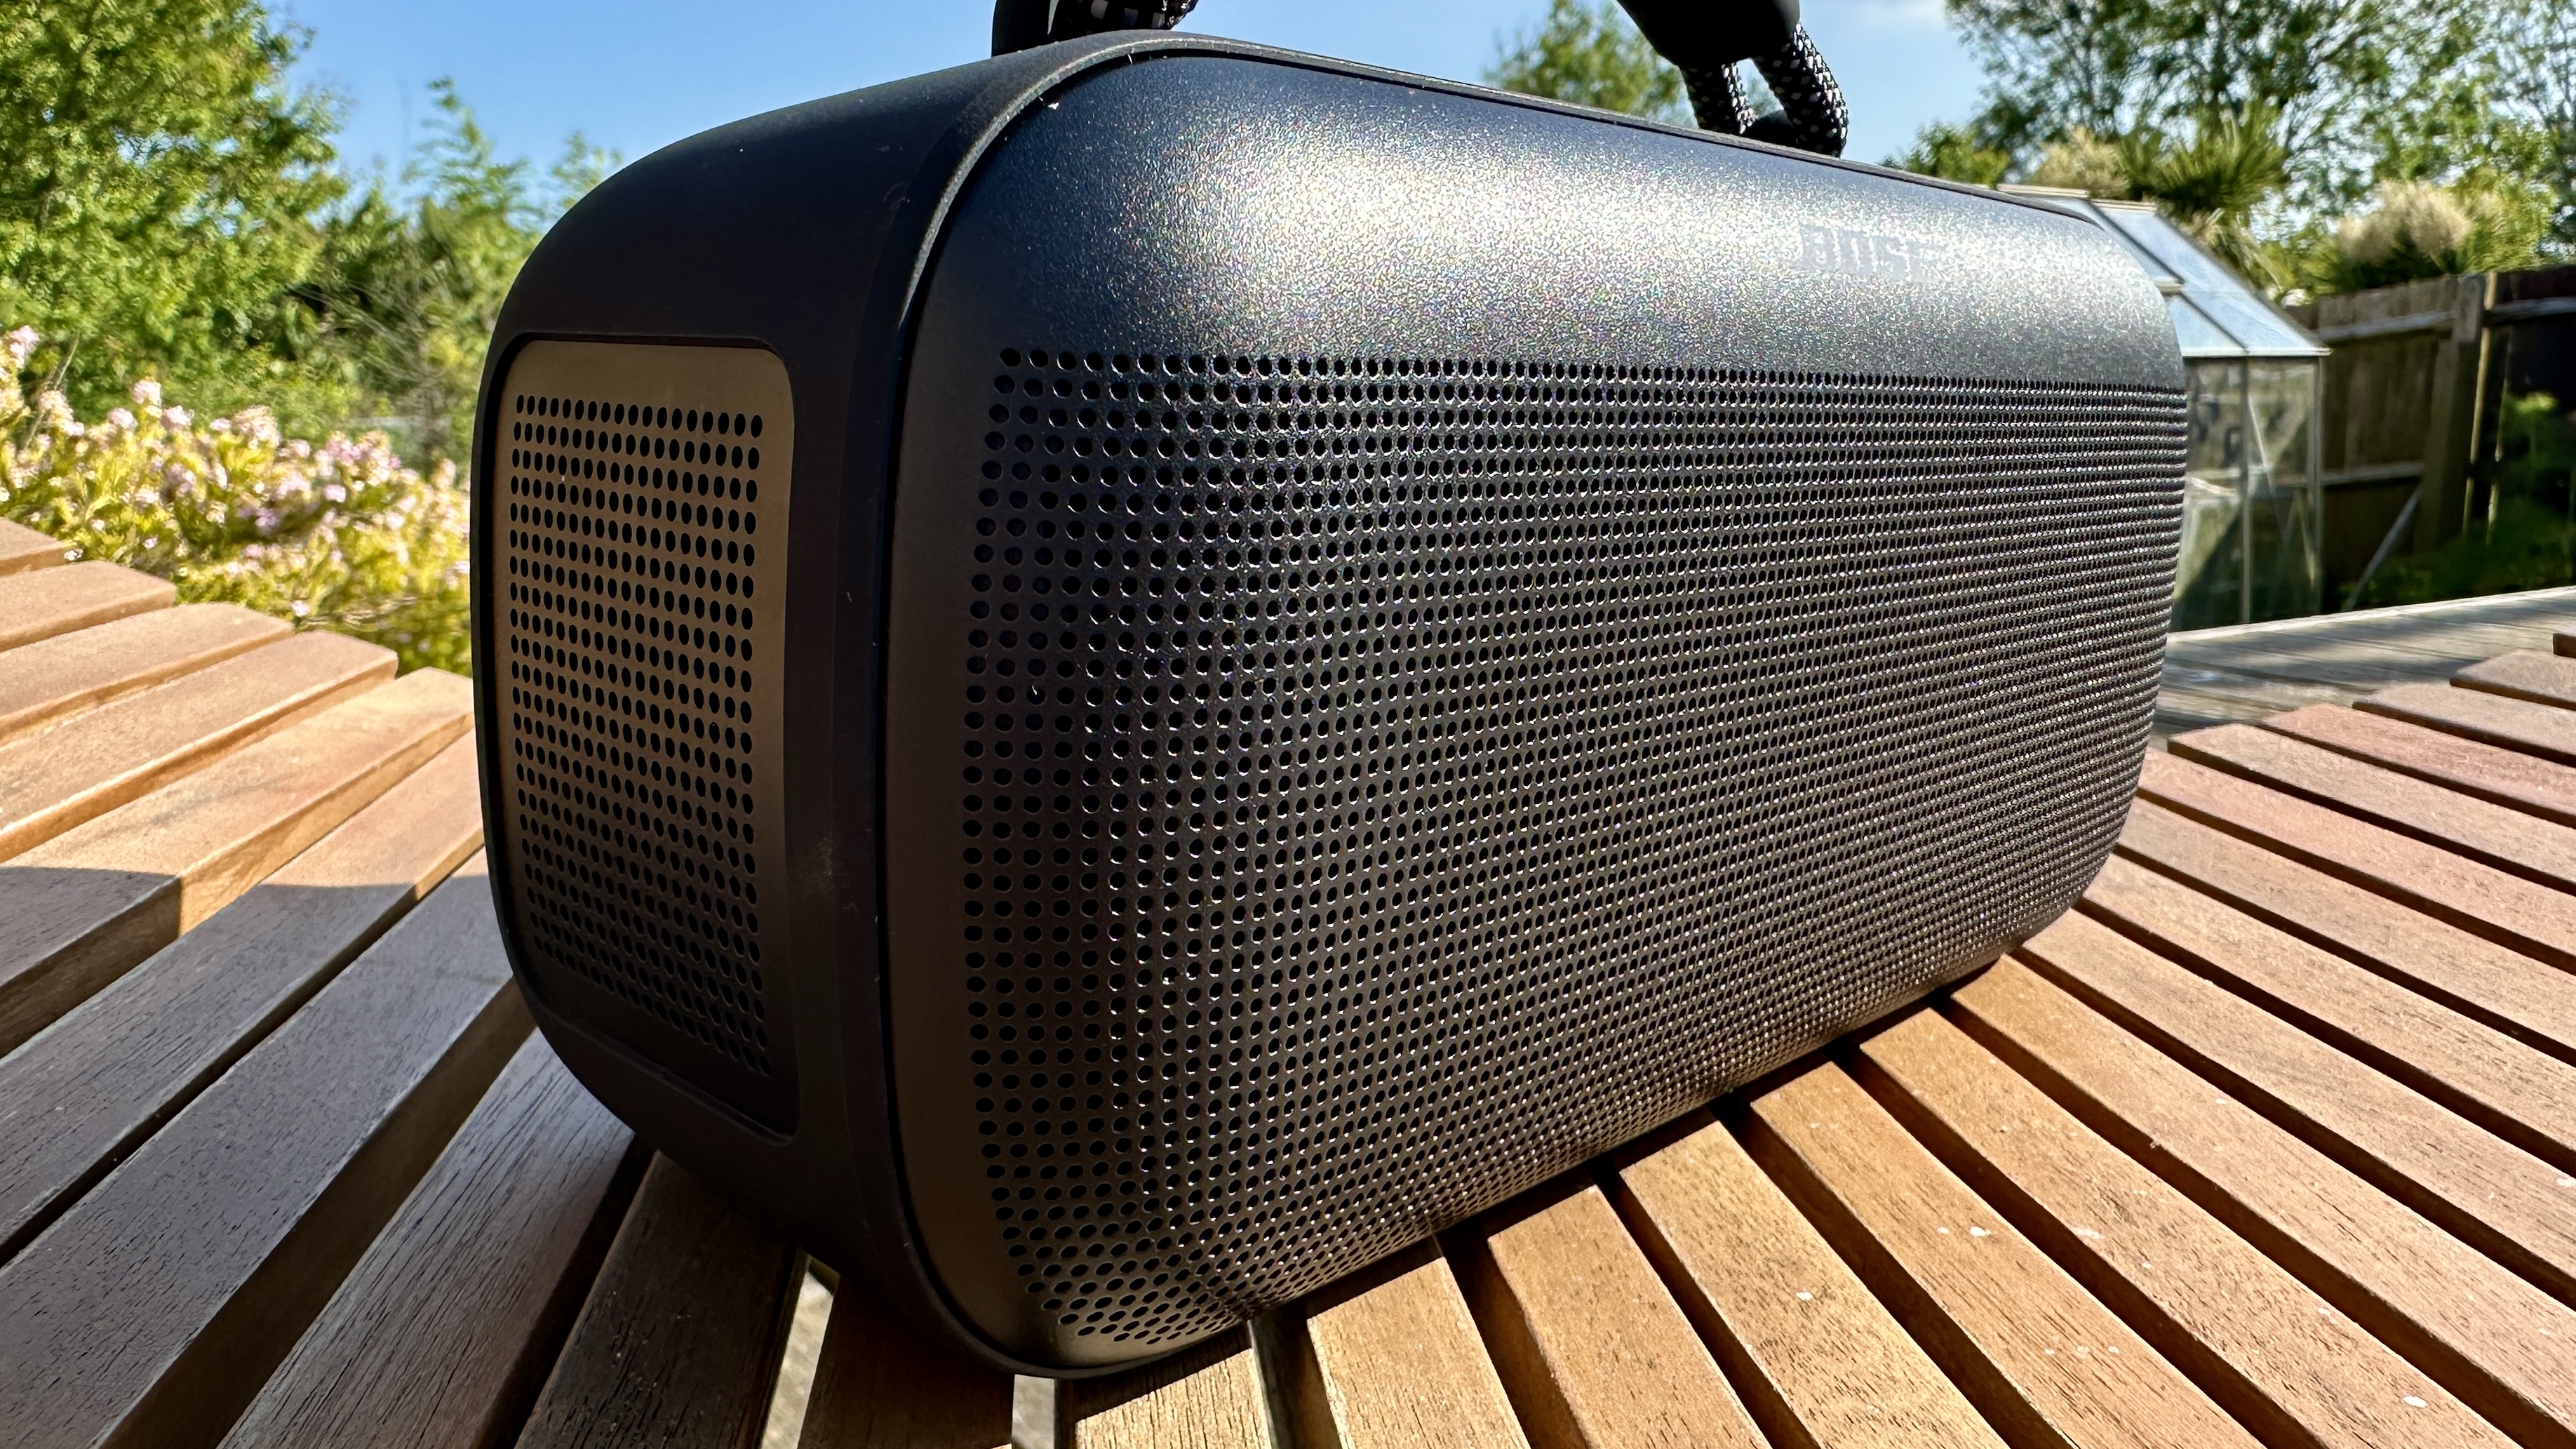 Bose SoundLink Max Bluetooth speaker on a wooden table